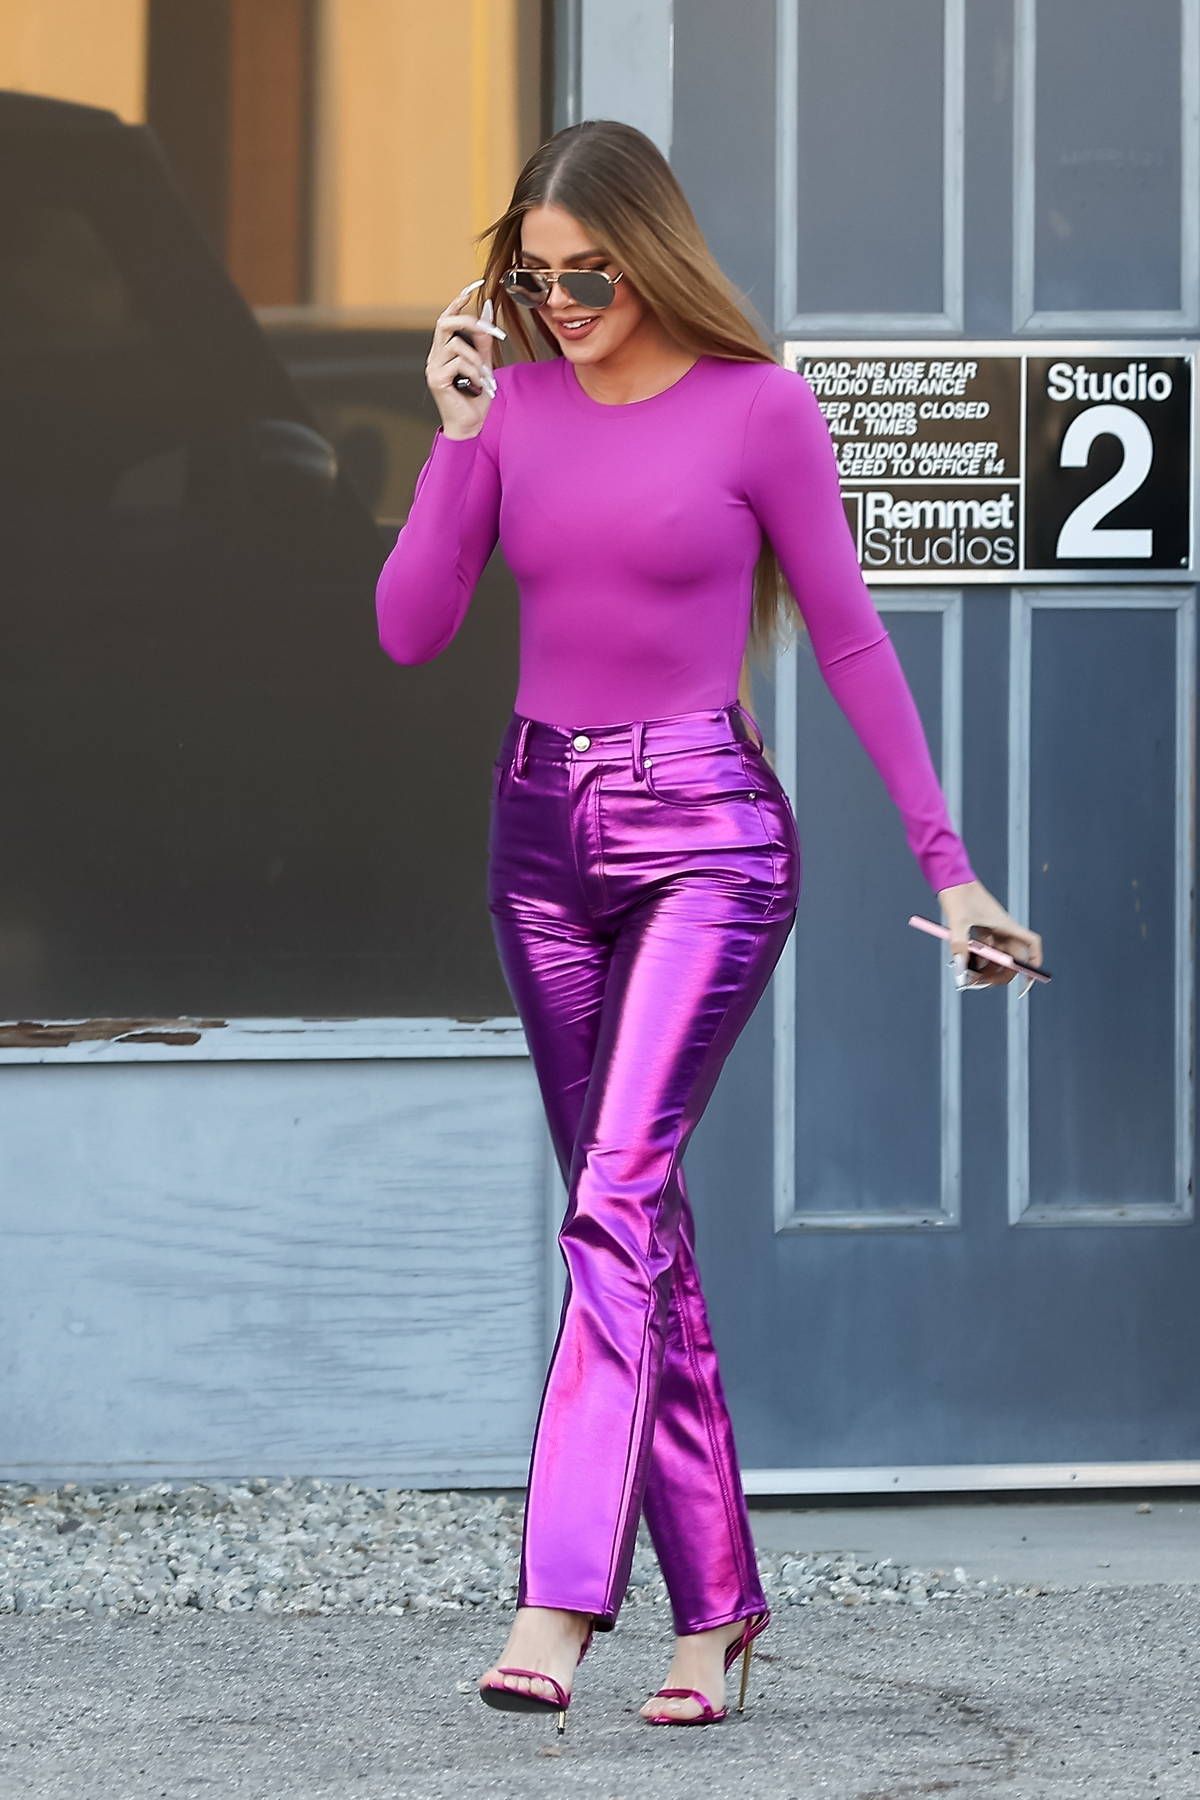 Khloe Kardashian looks striking in skintight purple top with matching pants  as she leaves a photoshoot